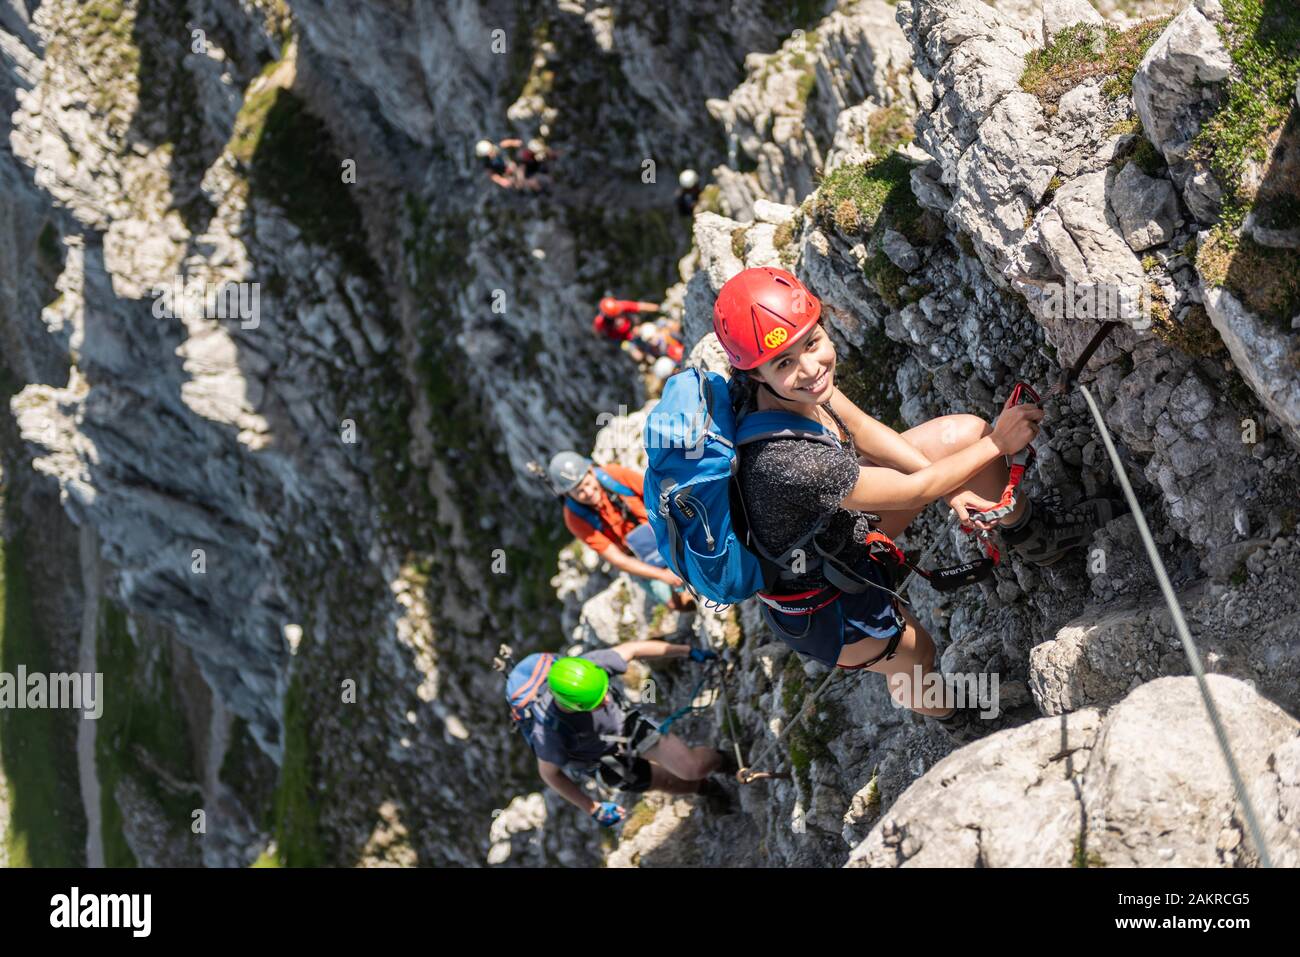 Group of mountaineers with helmet on a secured fixed rope route, Mittenwald via ferrata, Karwendel Mountains, Mittenwald, Germany Stock Photo